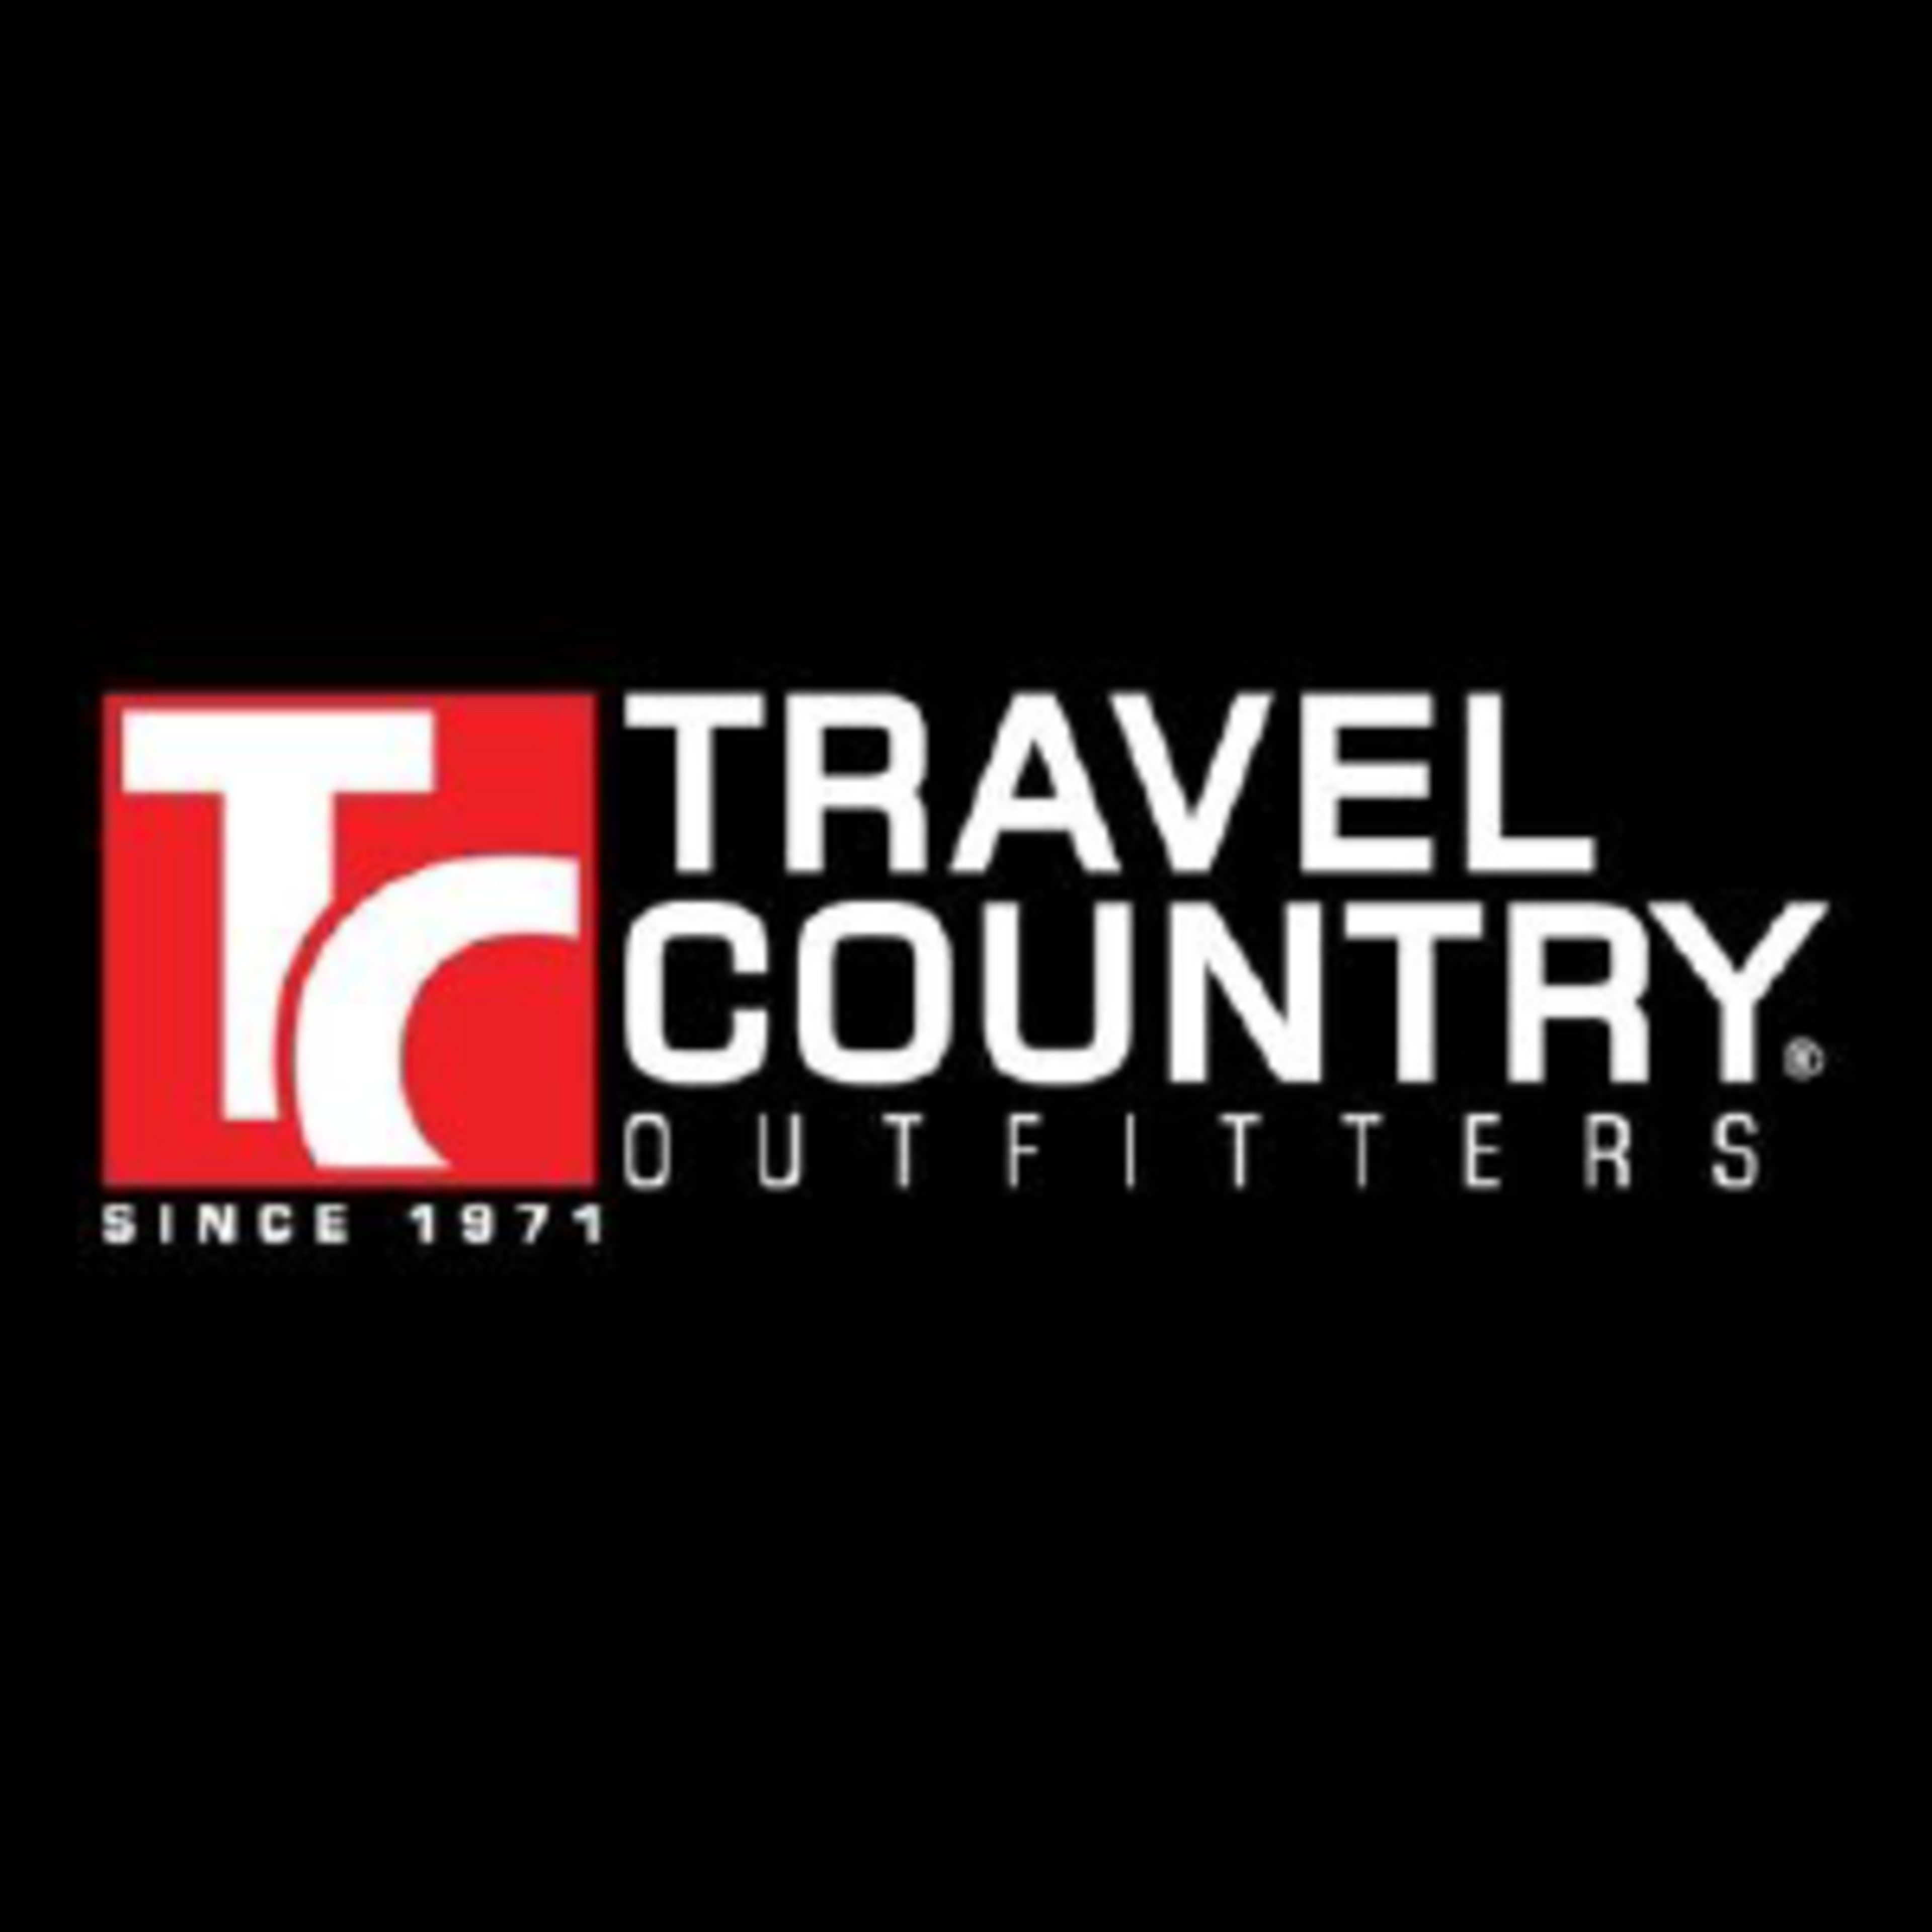 TravelCountry.comCode